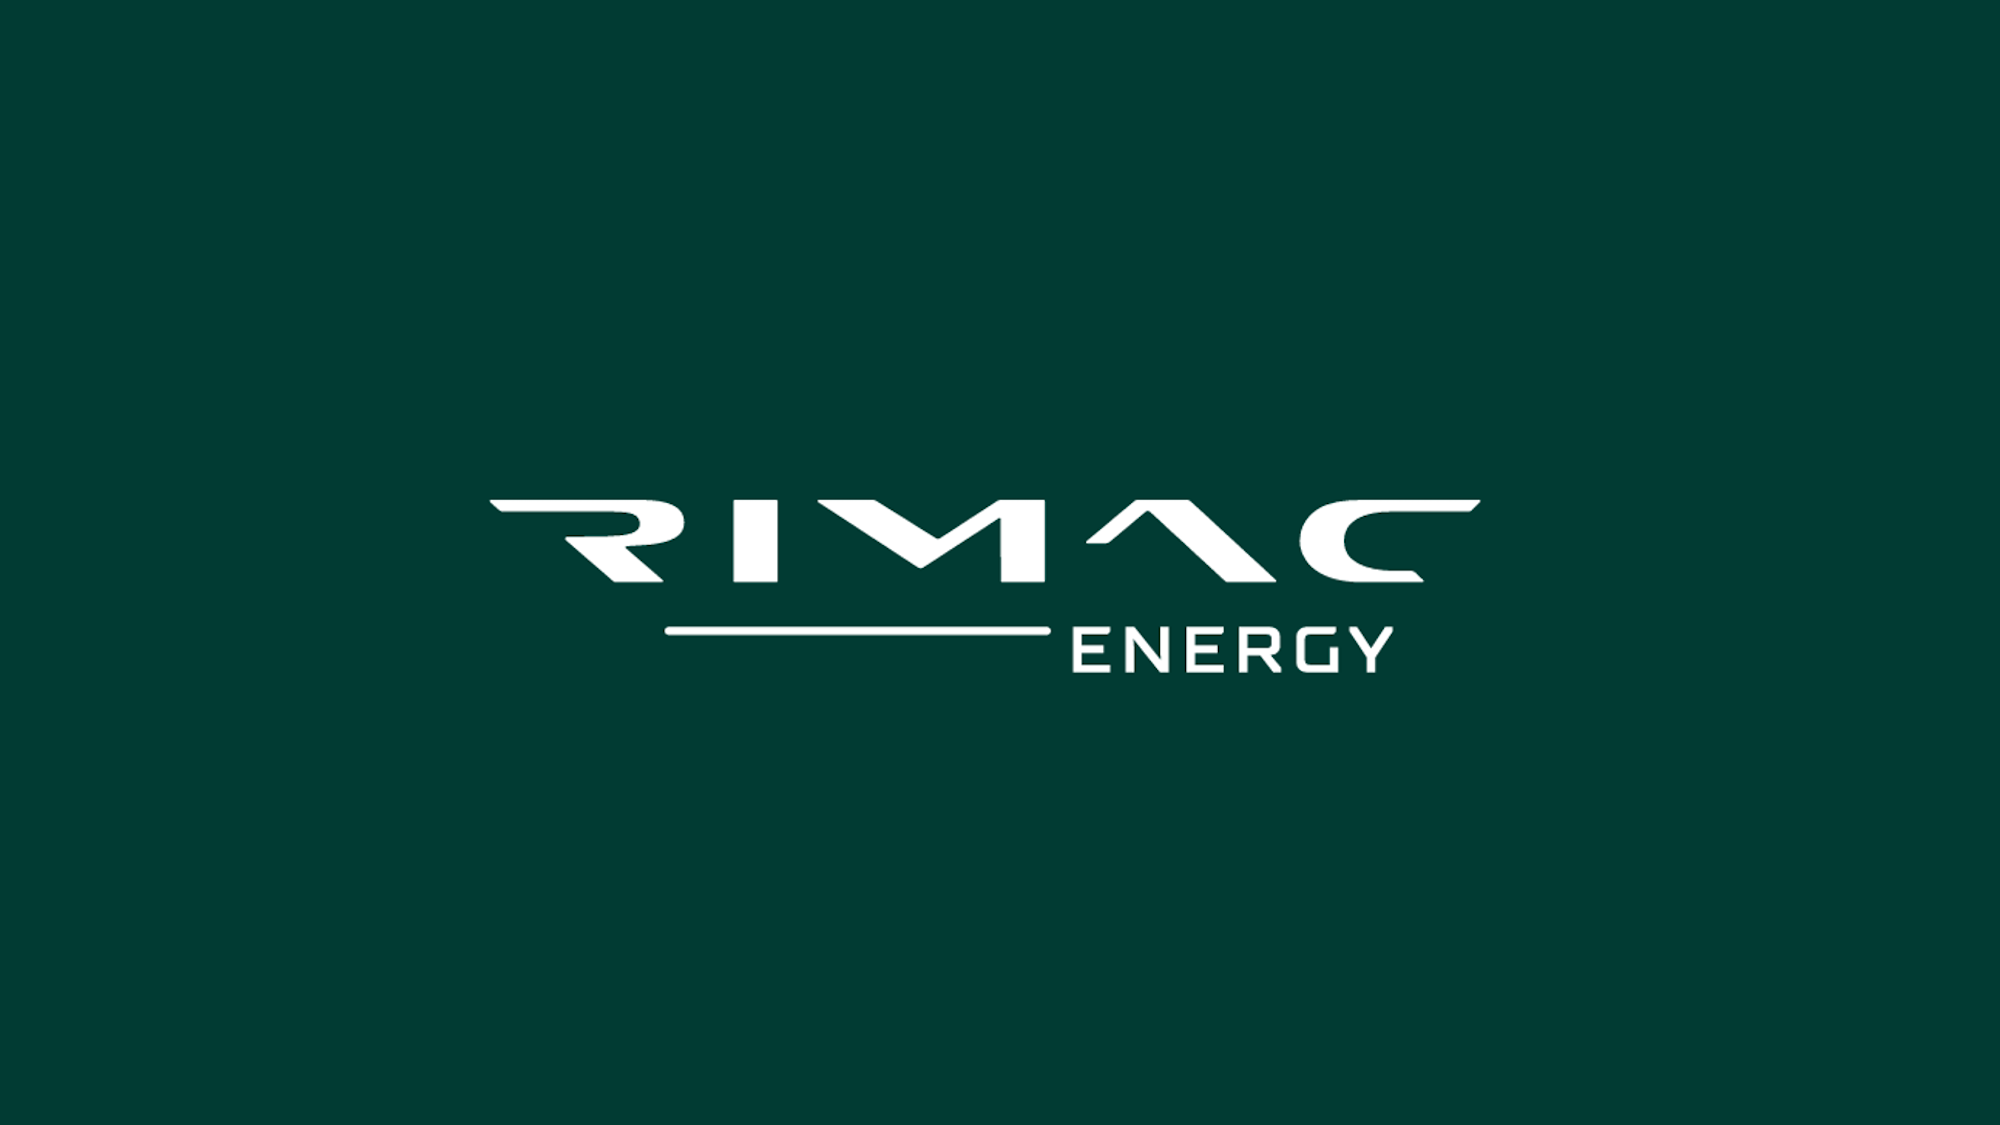 Rimac Technology has announced its entry into the stationary energy storage systems (ESS) market with a new brand, Rimac Energy.